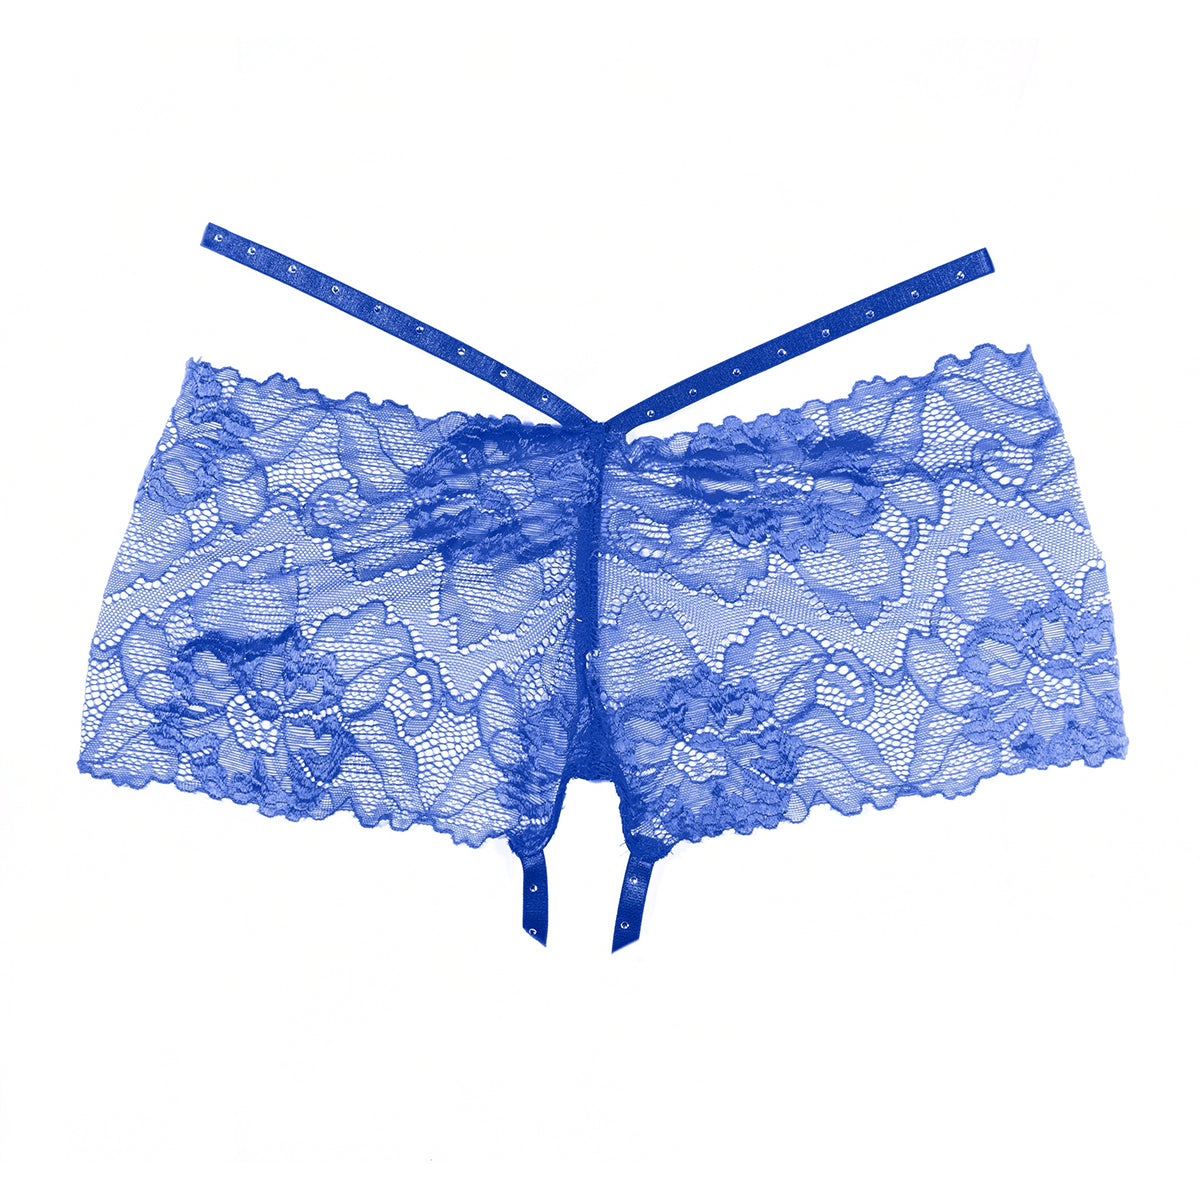 Allure Kelly Lace Crotchless Shorts – Blue